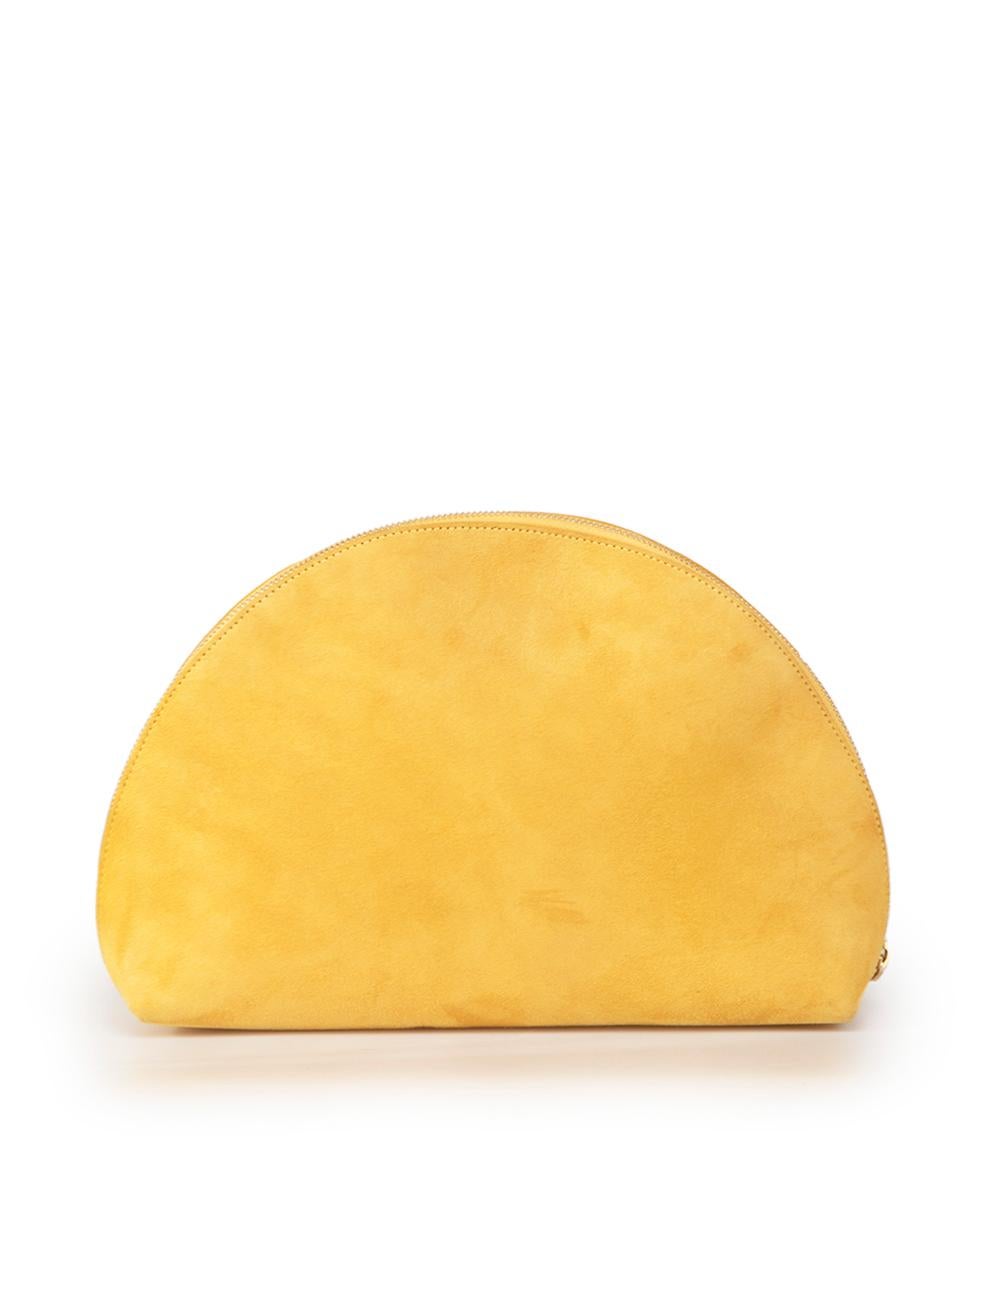 Mansur Gavriel Yellow Suede Half-Moon Clutch In Excellent Condition For Sale In London, GB